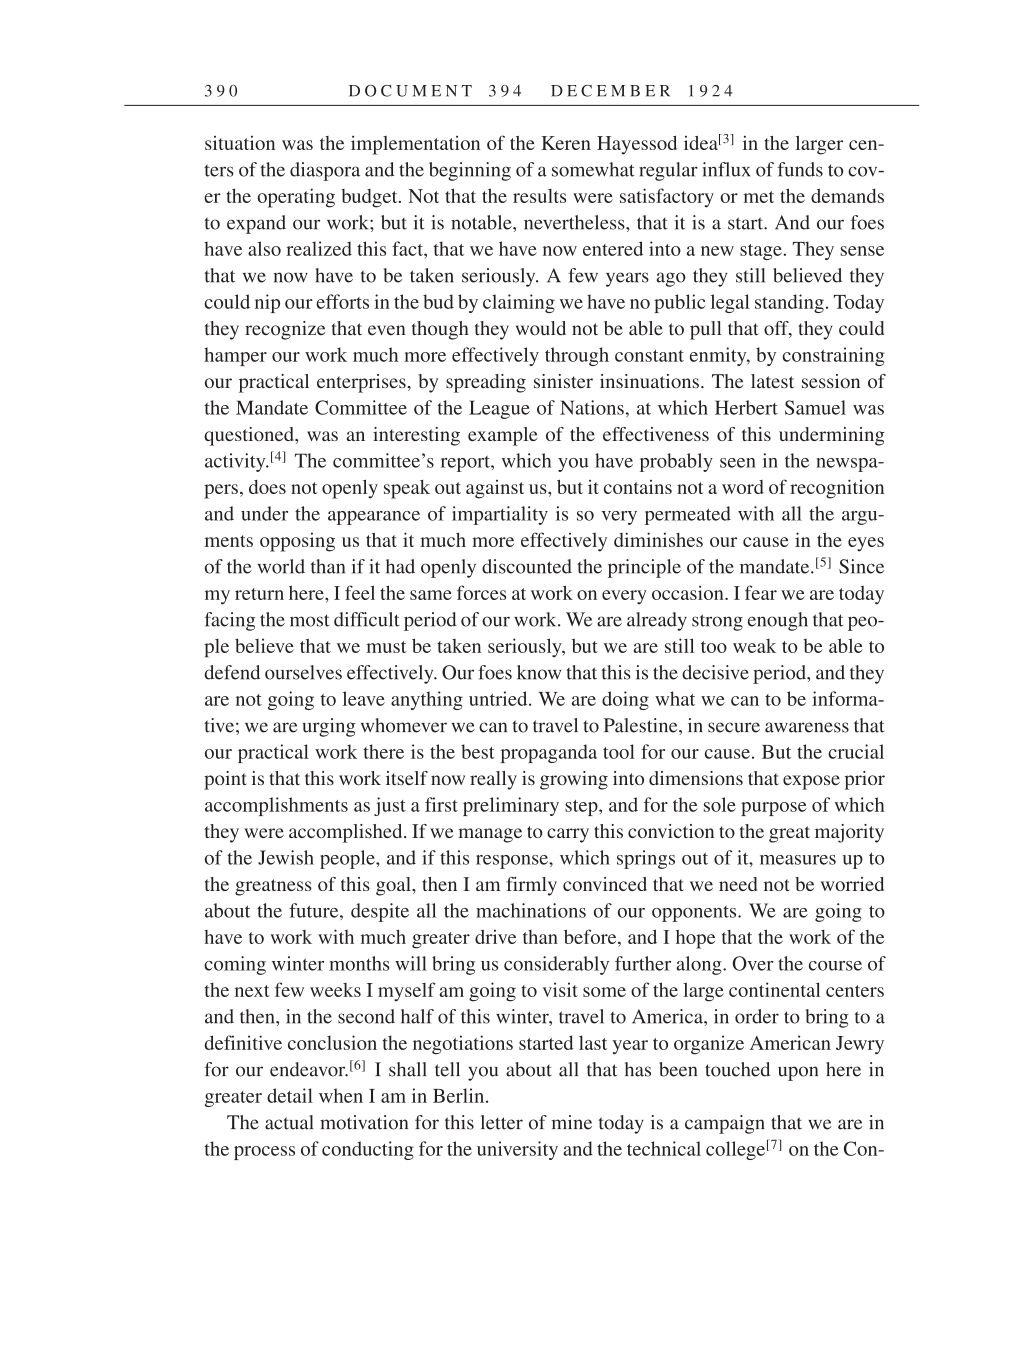 Volume 14: The Berlin Years: Writings & Correspondence, April 1923-May 1925 (English Translation Supplement) page 390